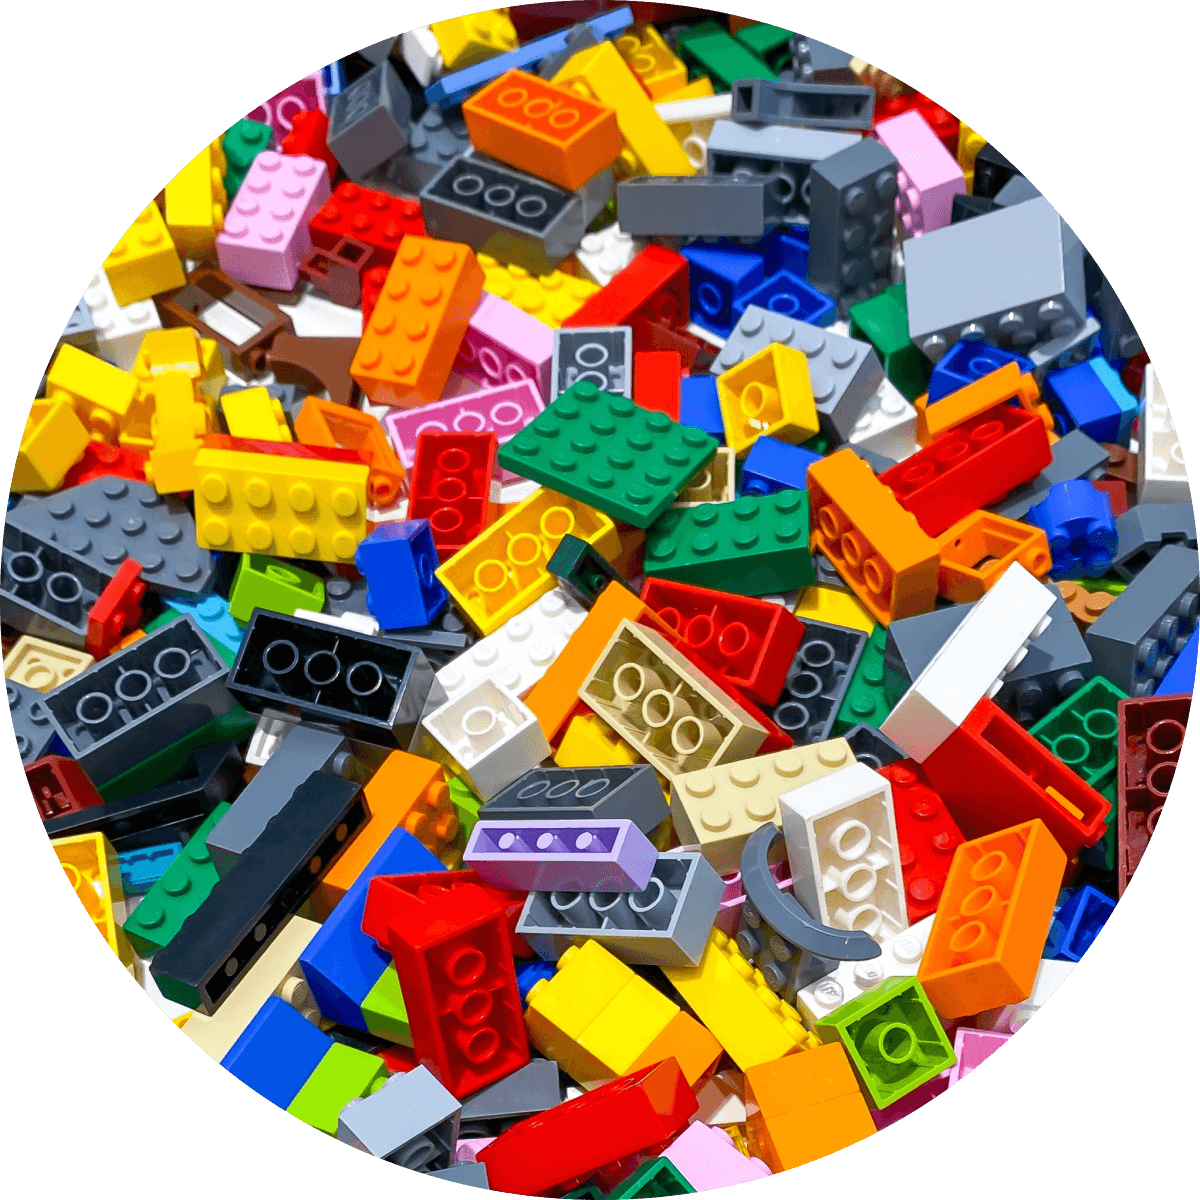 Messy stack of colorful LEGOs